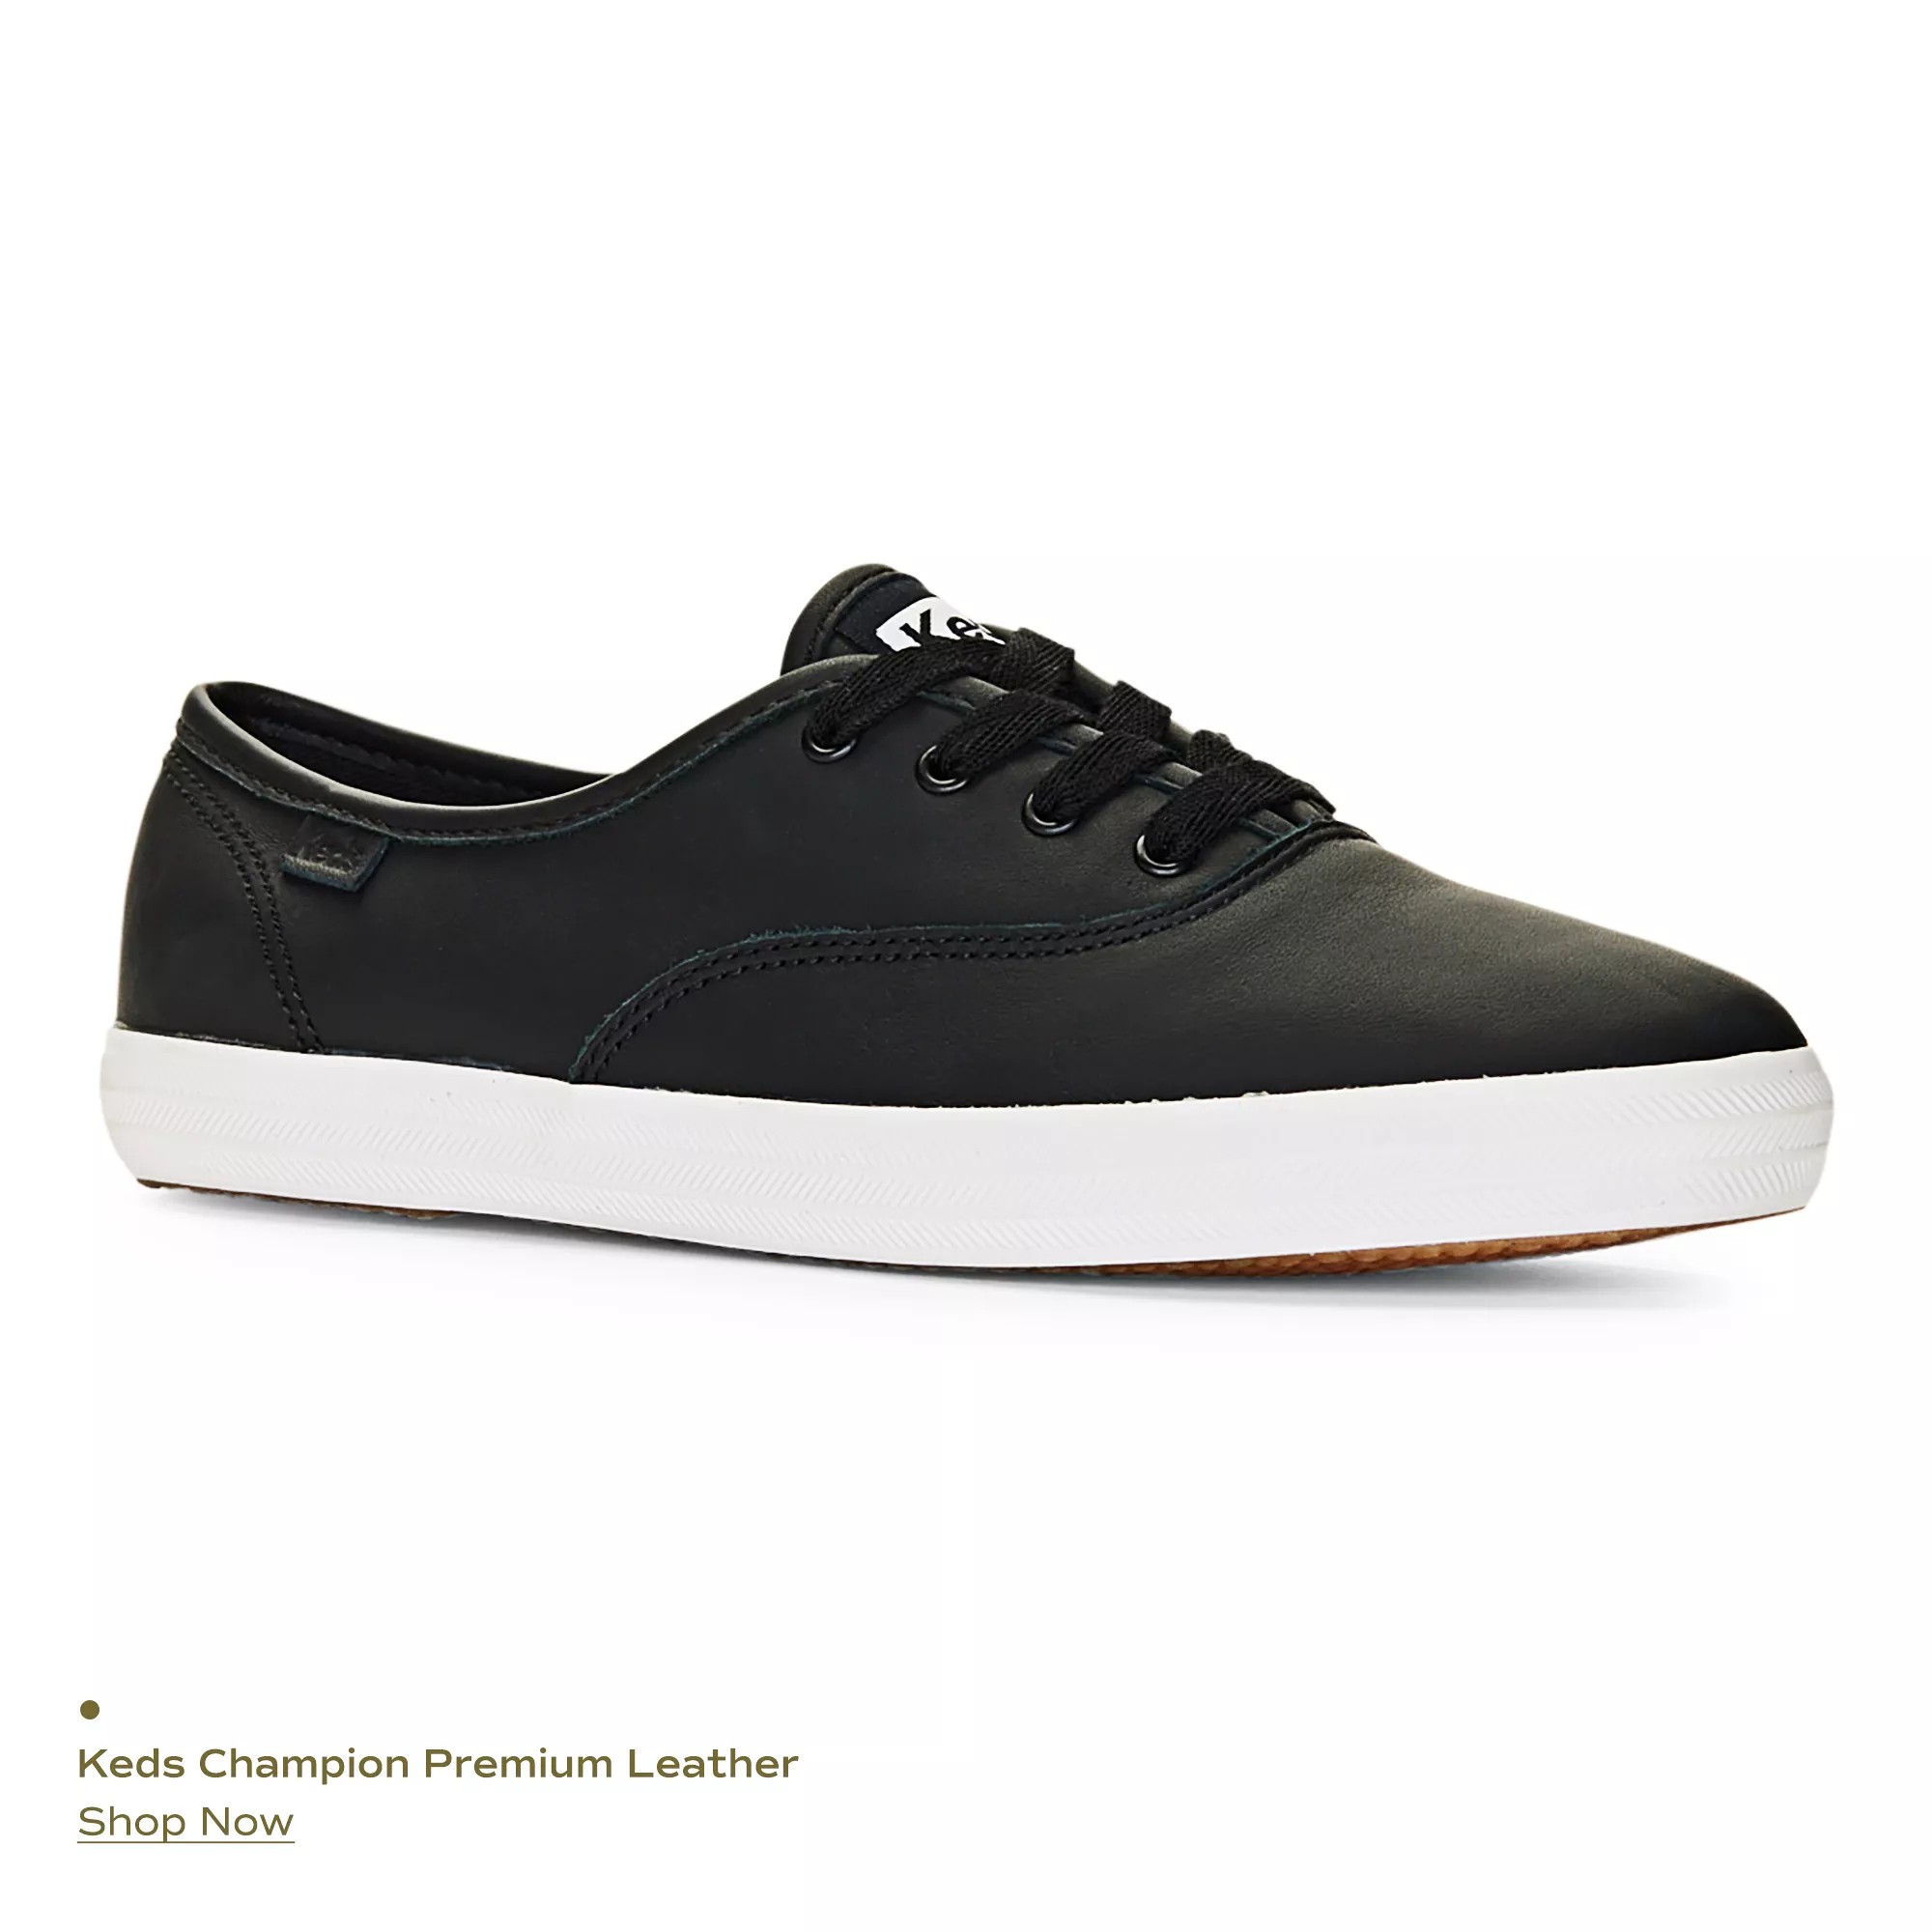 Shoes Womens, Mens and Kids Shoes from Top Brands KEDS